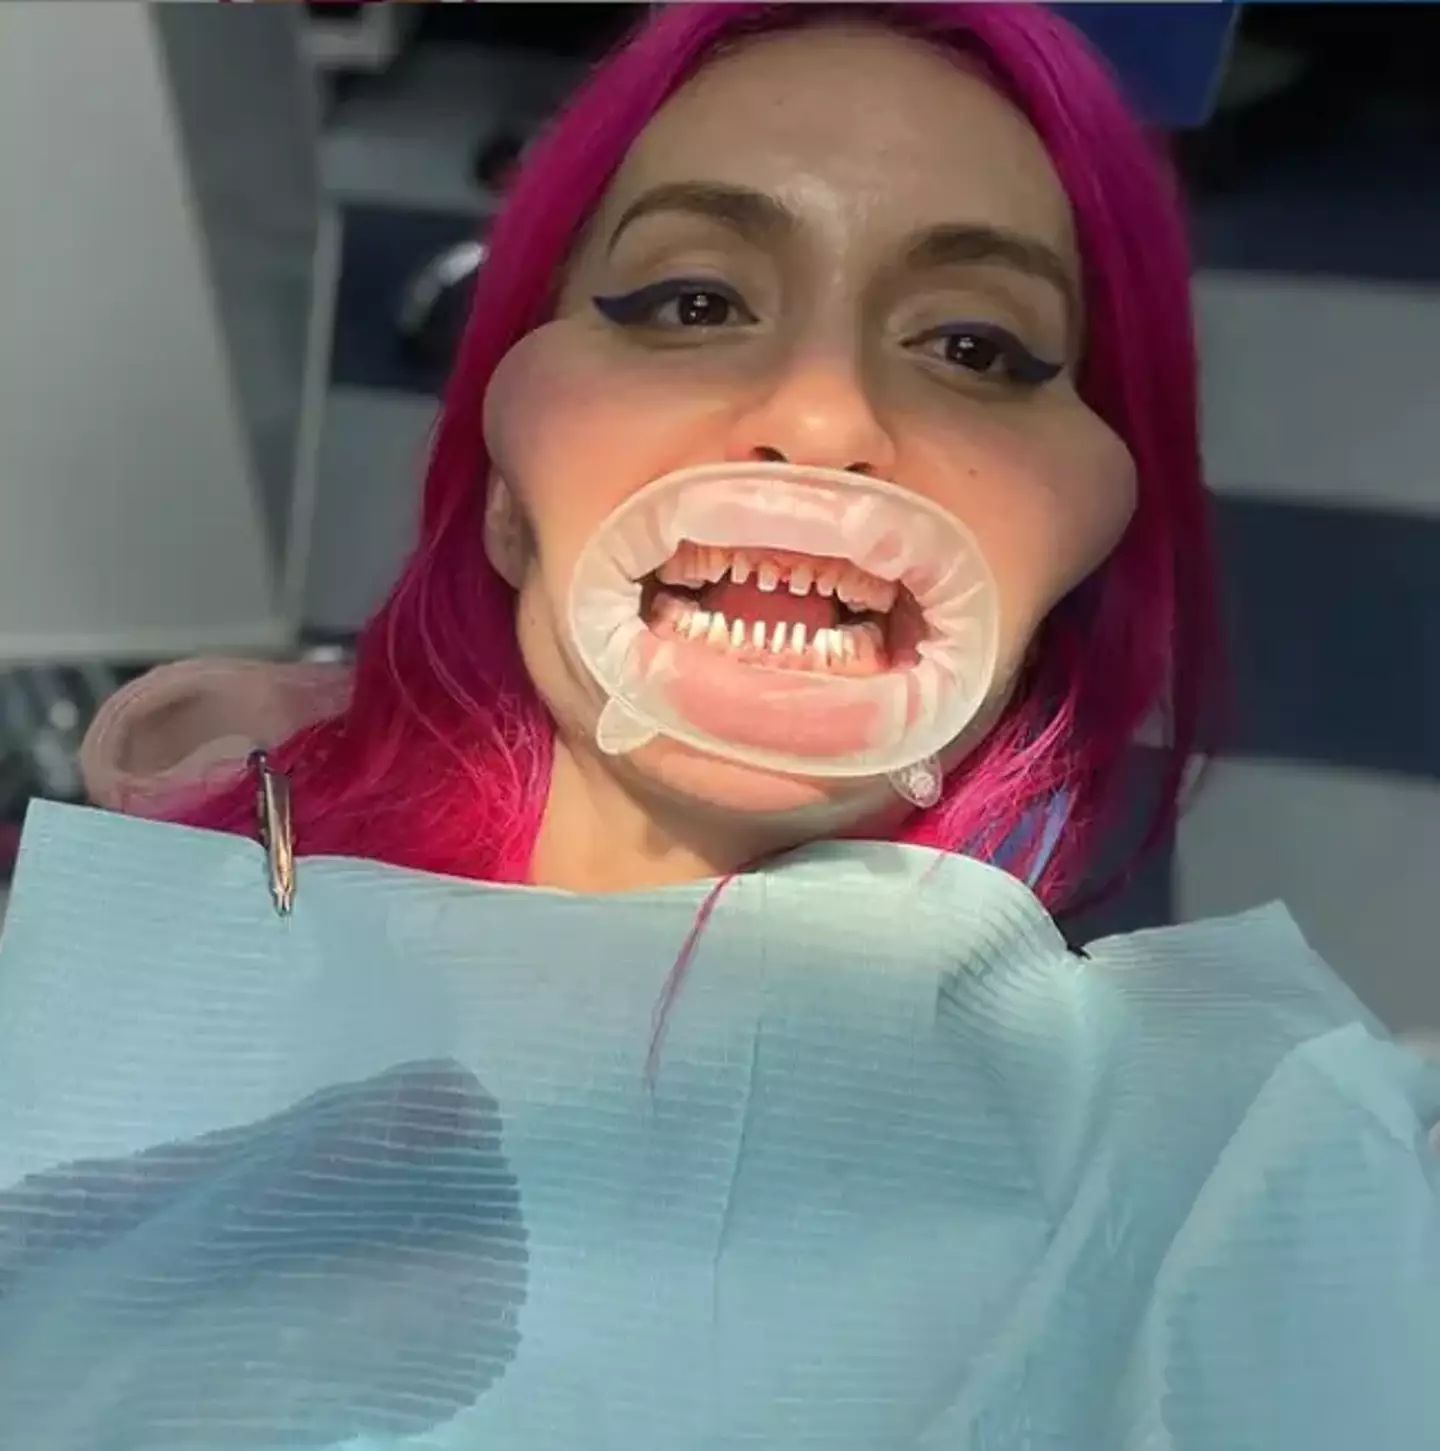 The influencer previously showed off what her teeth look like under the veneers.